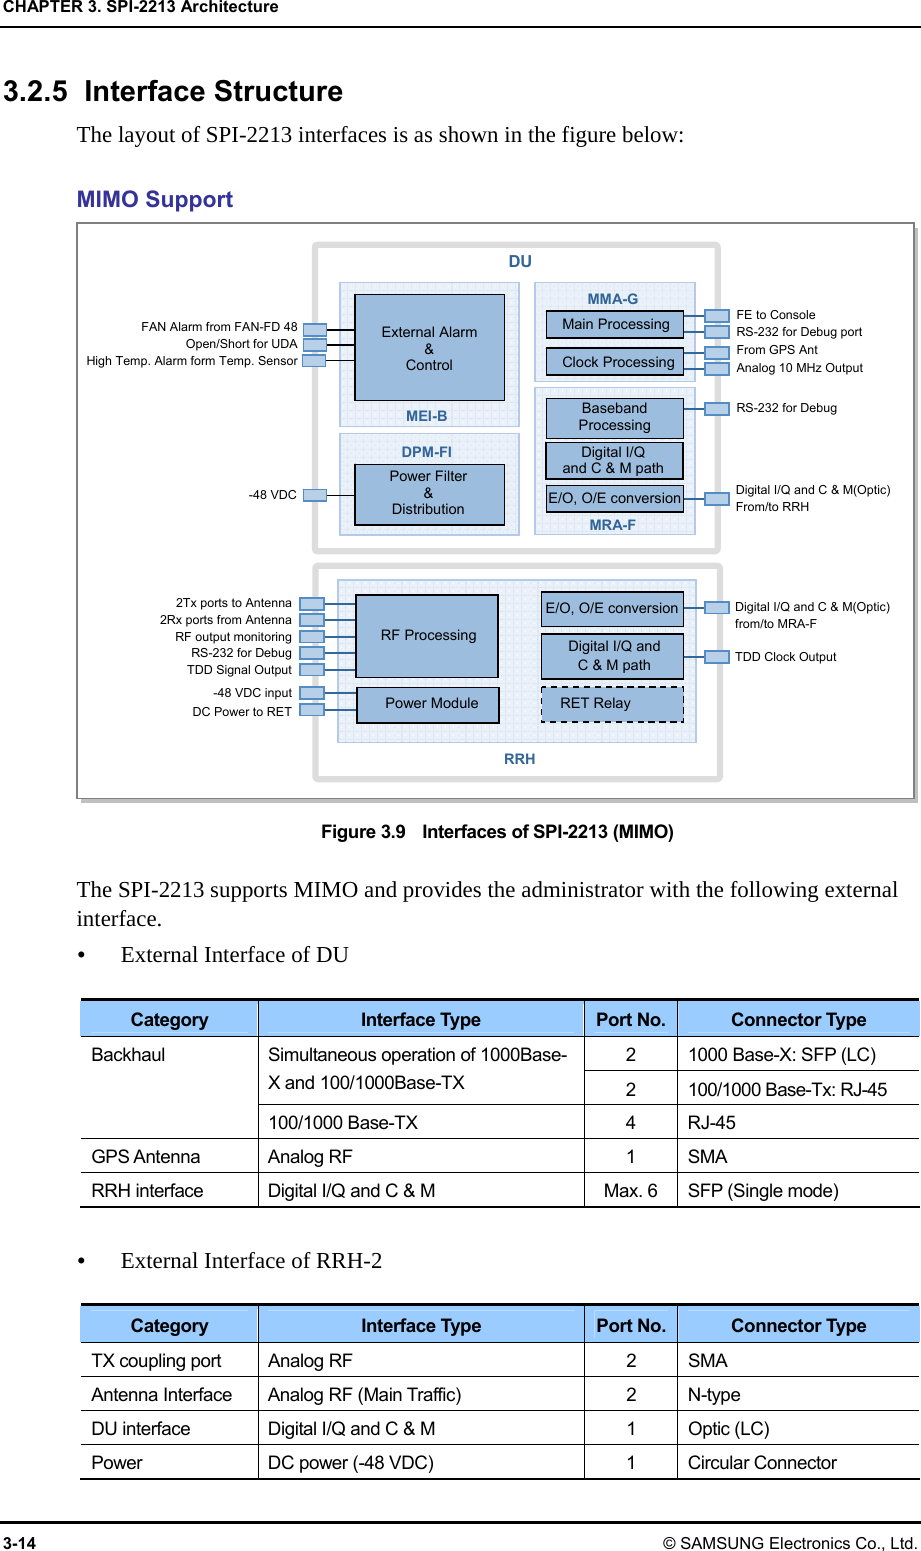 CHAPTER 3. SPI-2213 Architecture 3-14 © SAMSUNG Electronics Co., Ltd. 3.2.5 Interface Structure The layout of SPI-2213 interfaces is as shown in the figure below:  MIMO Support Figure 3.9    Interfaces of SPI-2213 (MIMO)  The SPI-2213 supports MIMO and provides the administrator with the following external interface. y External Interface of DU  Category  Interface Type  Port No. Connector Type 2  1000 Base-X: SFP (LC) Simultaneous operation of 1000Base-X and 100/1000Base-TX  2  100/1000 Base-Tx: RJ-45 Backhaul 100/1000 Base-TX  4  RJ-45 GPS Antenna  Analog RF  1  SMA RRH interface  Digital I/Q and C &amp; M  Max. 6  SFP (Single mode)  y External Interface of RRH-2  Category  Interface Type  Port No. Connector Type TX coupling port  Analog RF  2  SMA Antenna Interface  Analog RF (Main Traffic)  2  N-type DU interface  Digital I/Q and C &amp; M  1  Optic (LC) Power  DC power (-48 VDC)  1  Circular Connector MMA-G DU MEI-B Main ProcessingClock ProcessingPower Filter&amp; Distribution DPM-FI MRA-F Digital I/Q   and C &amp; M pathBaseband ProcessingExternal Alarm&amp; Control FAN Alarm from FAN-FD 48 Open/Short for UDA High Temp. Alarm form Temp. Sensor -48 VDC FE to Console RS-232 for Debug port From GPS Ant Analog 10 MHz Output   RS-232 for Debug Digital I/Q and C &amp; M(Optic) From/to RRH RRH E/O, O/E conversionRET RelayDigital I/Q and C &amp; M(Optic) from/to MRA-F  TDD Clock Output Digital I/Q andC &amp; M path E/O, O/E conversion2Tx ports to Antenna 2Rx ports from Antenna RF output monitoring RS-232 for Debug TDD Signal Output -48 VDC input DC Power to RET RF ProcessingPower Module